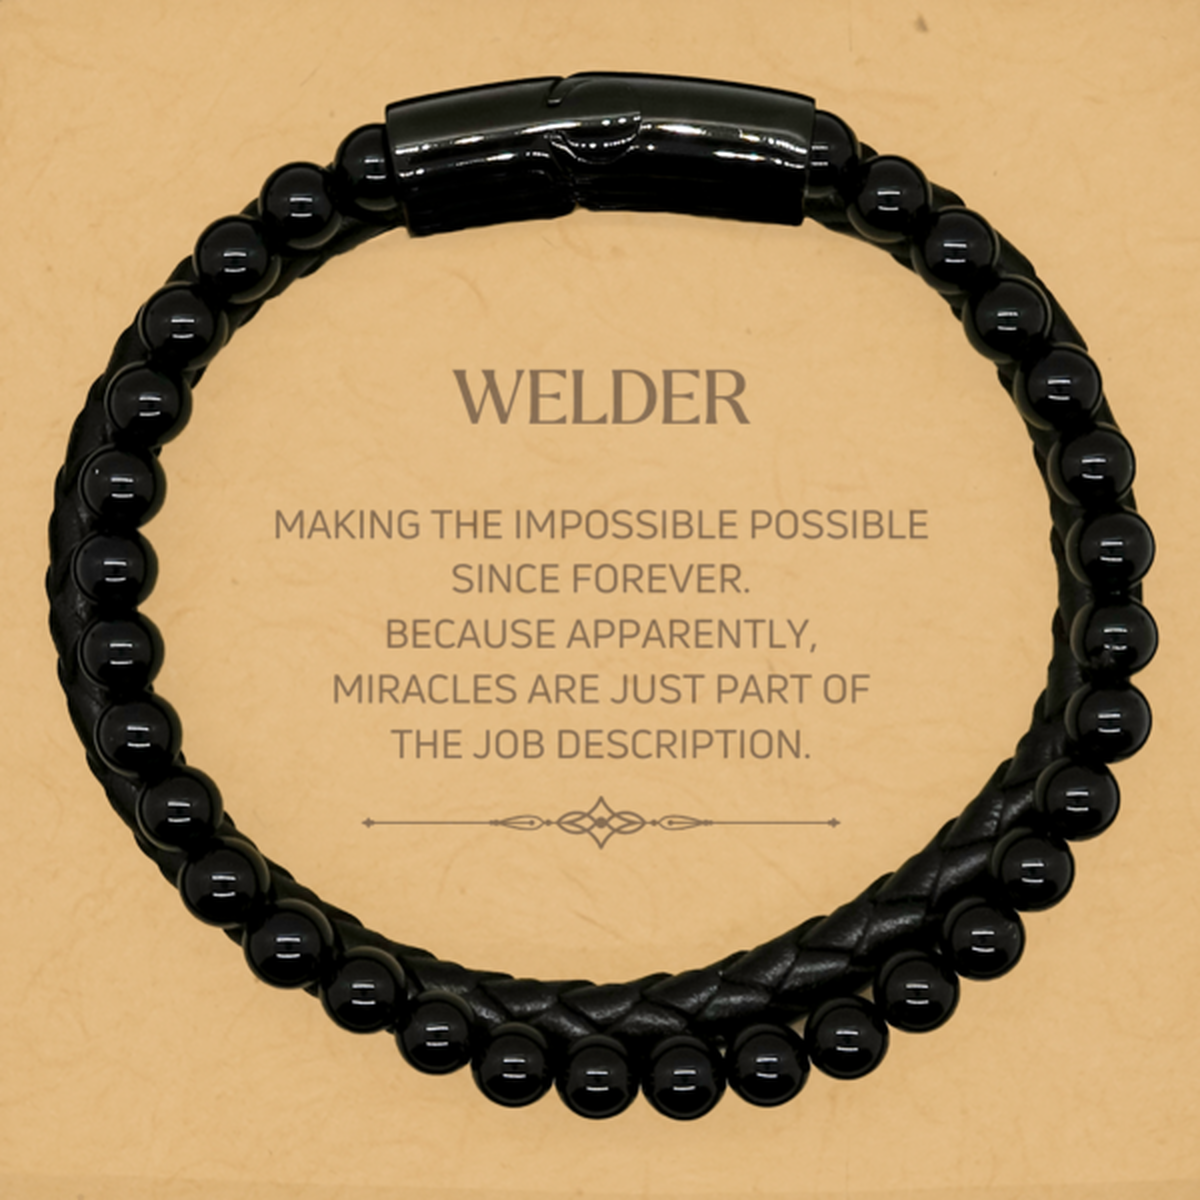 Funny Welder Gifts, Miracles are just part of the job description, Inspirational Birthday Stone Leather Bracelets For Welder, Men, Women, Coworkers, Friends, Boss